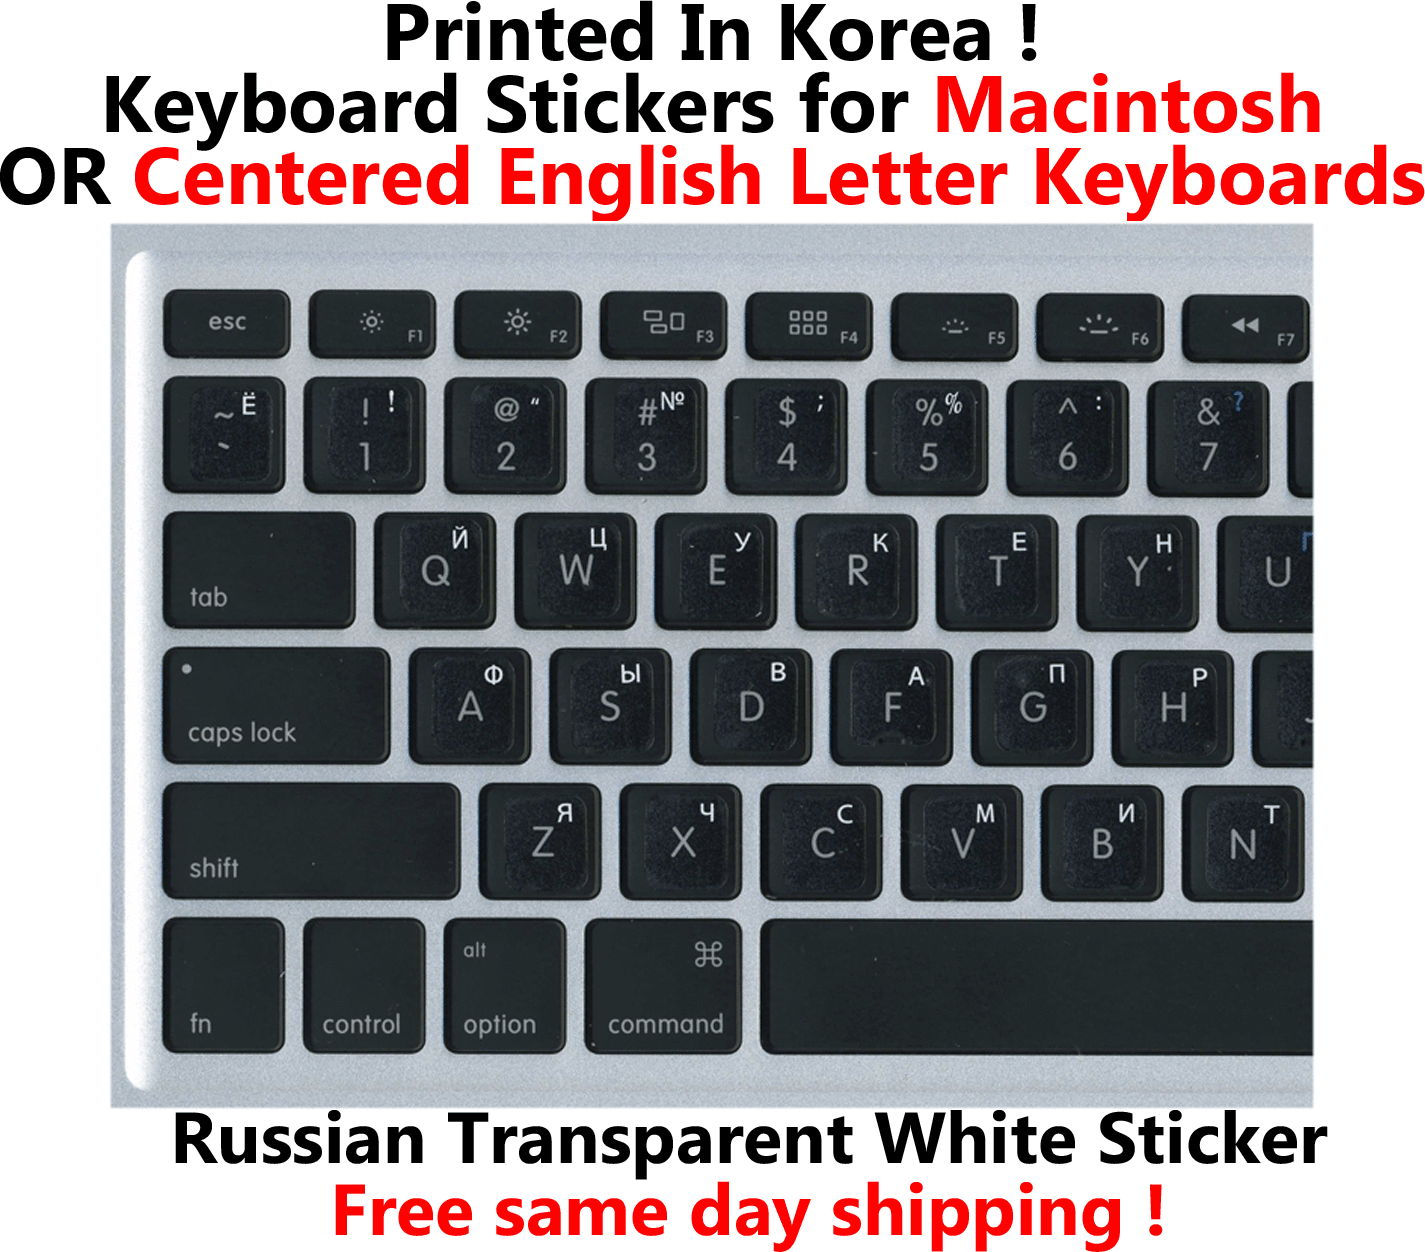 Russian White Transparent 代引き不可 Sticker 【51%OFF!】 for or Cente Windows Mac Apple